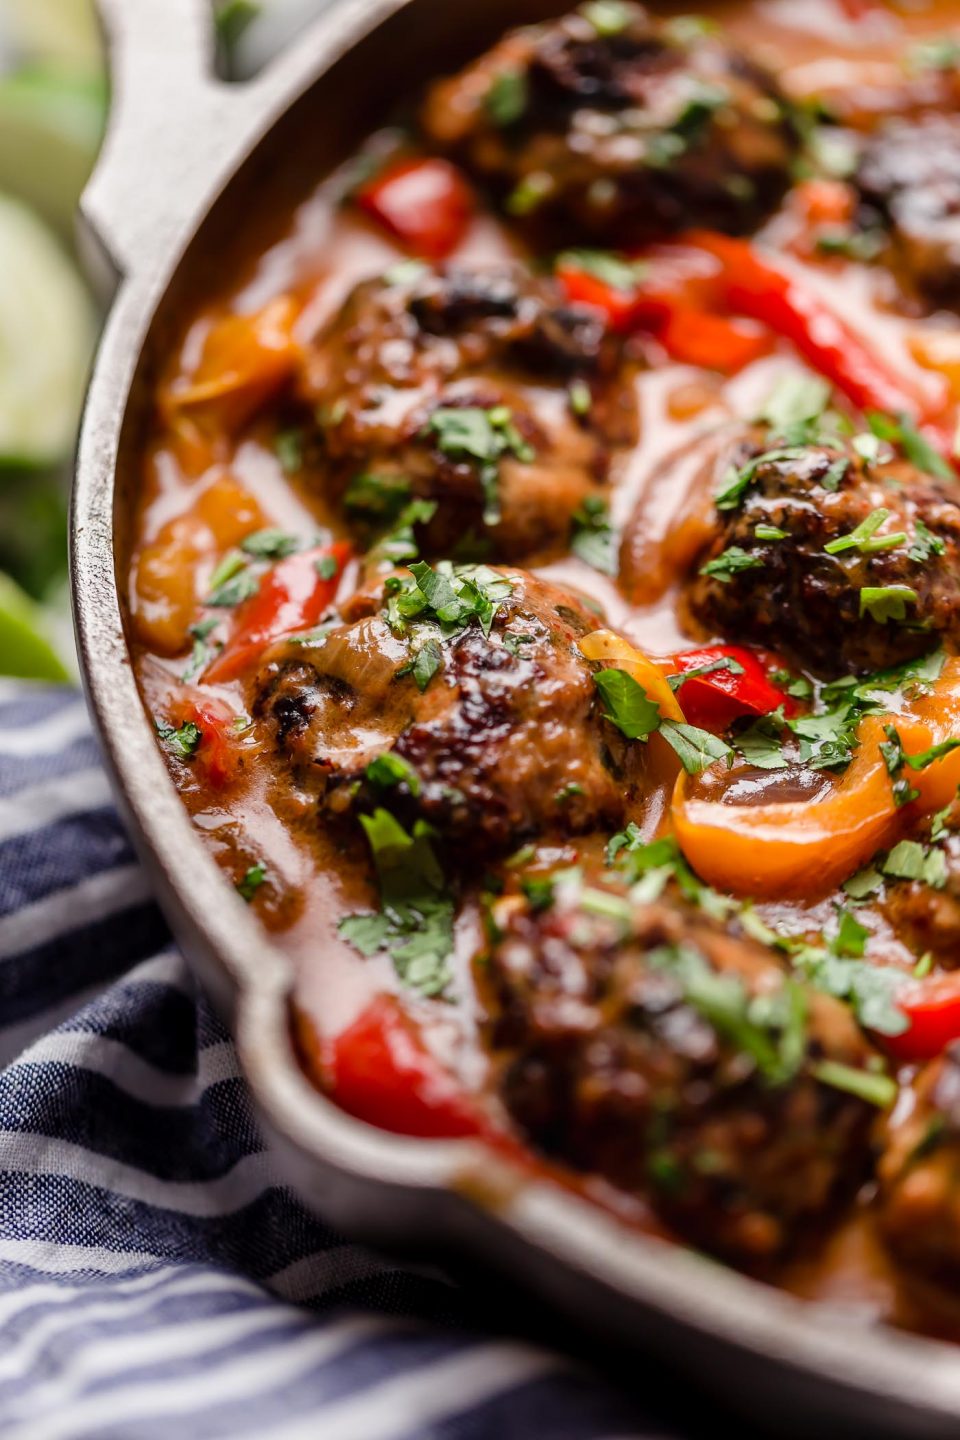 A side angle shot of red curry meatballs fill a large cast iron skillet that sits atop a creamy white textured surface. The meatballs have been garnished with fresh chopped herbs. A blue and white striped linen napkin and lime wedges surround the skillet.